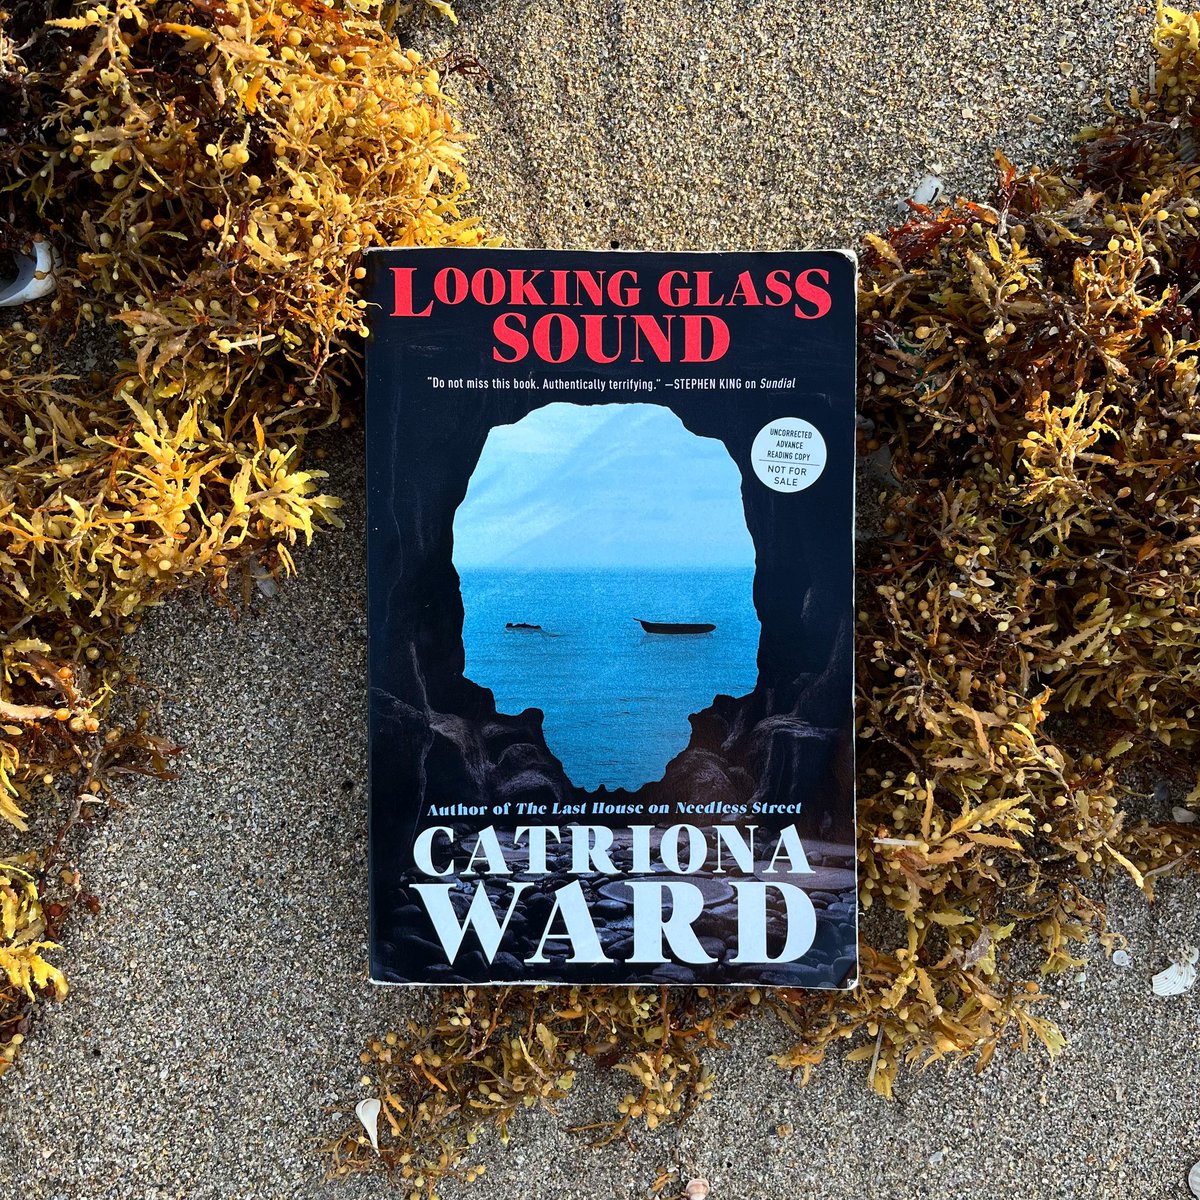 Many thanks to @TorNightfire and @Catrionaward for the ARC 🪞✨ with every release, I fall more and more in love with Ward’s writing and storytelling, which is especially true in the case of Looking Glass Sound 💖 5 stars from me‼️
#lookingglasssound #tornightfire